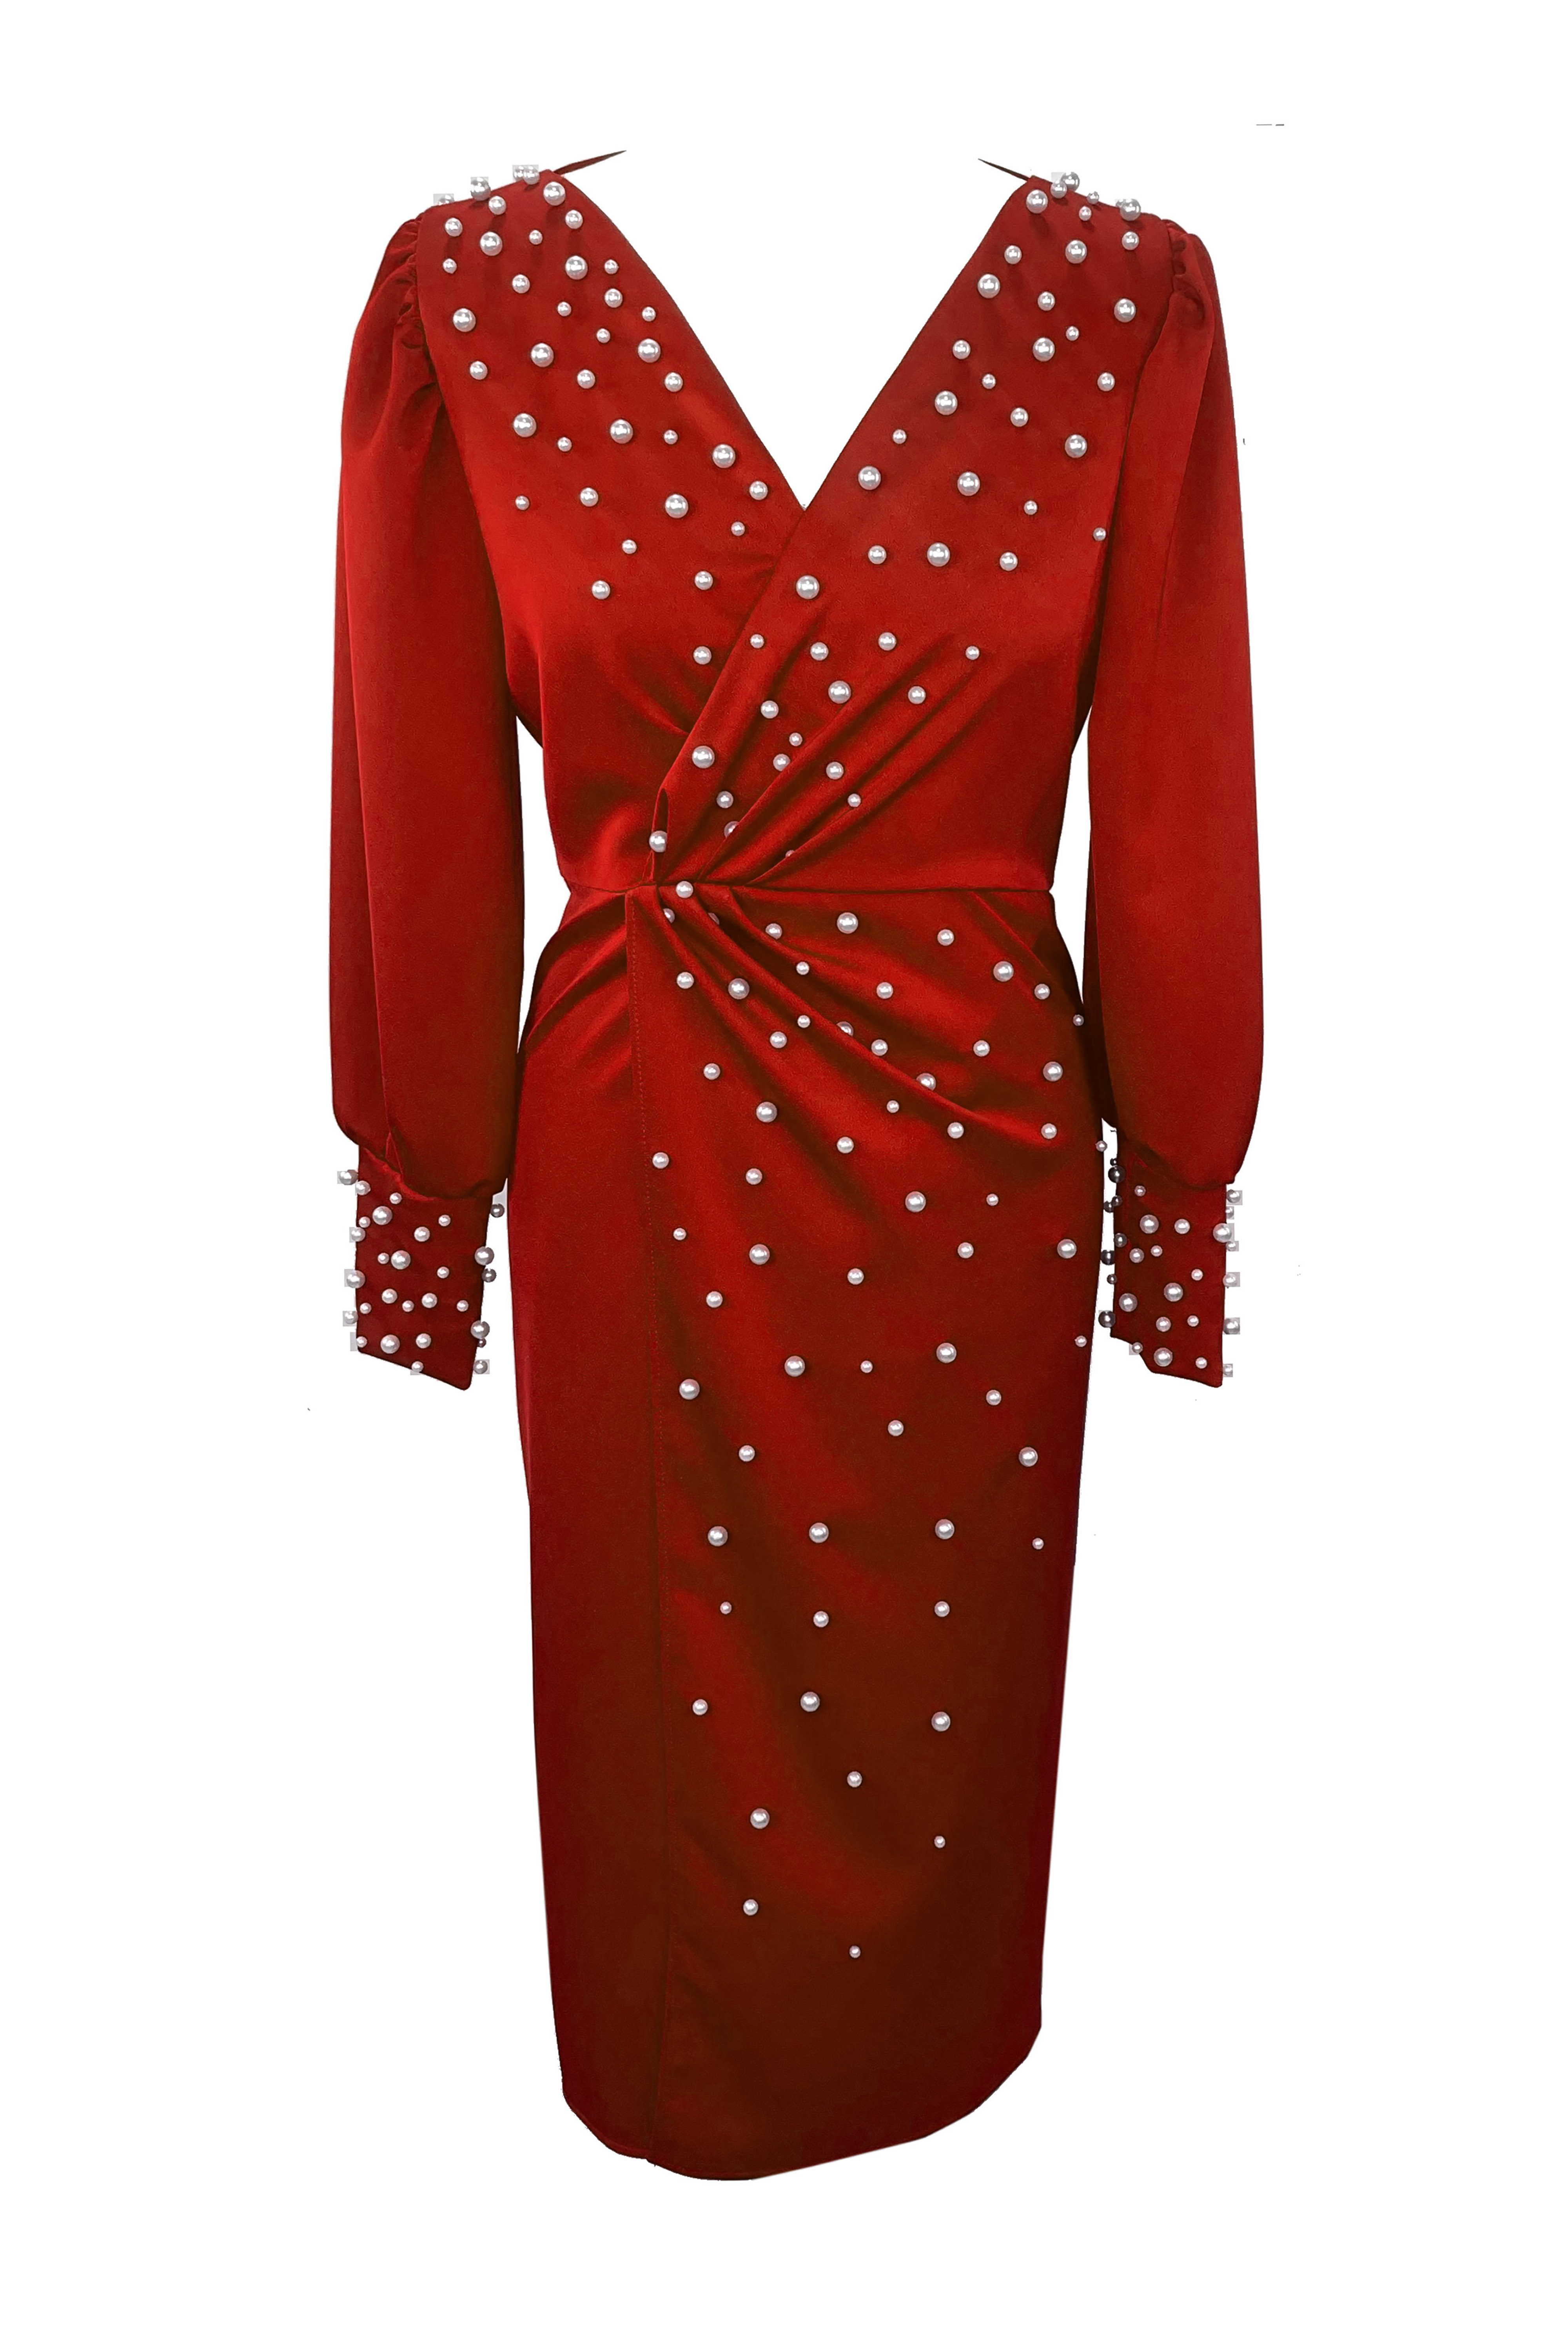 R24101 - RED 01 - AMINA red dress with pearls - Ambar Studio